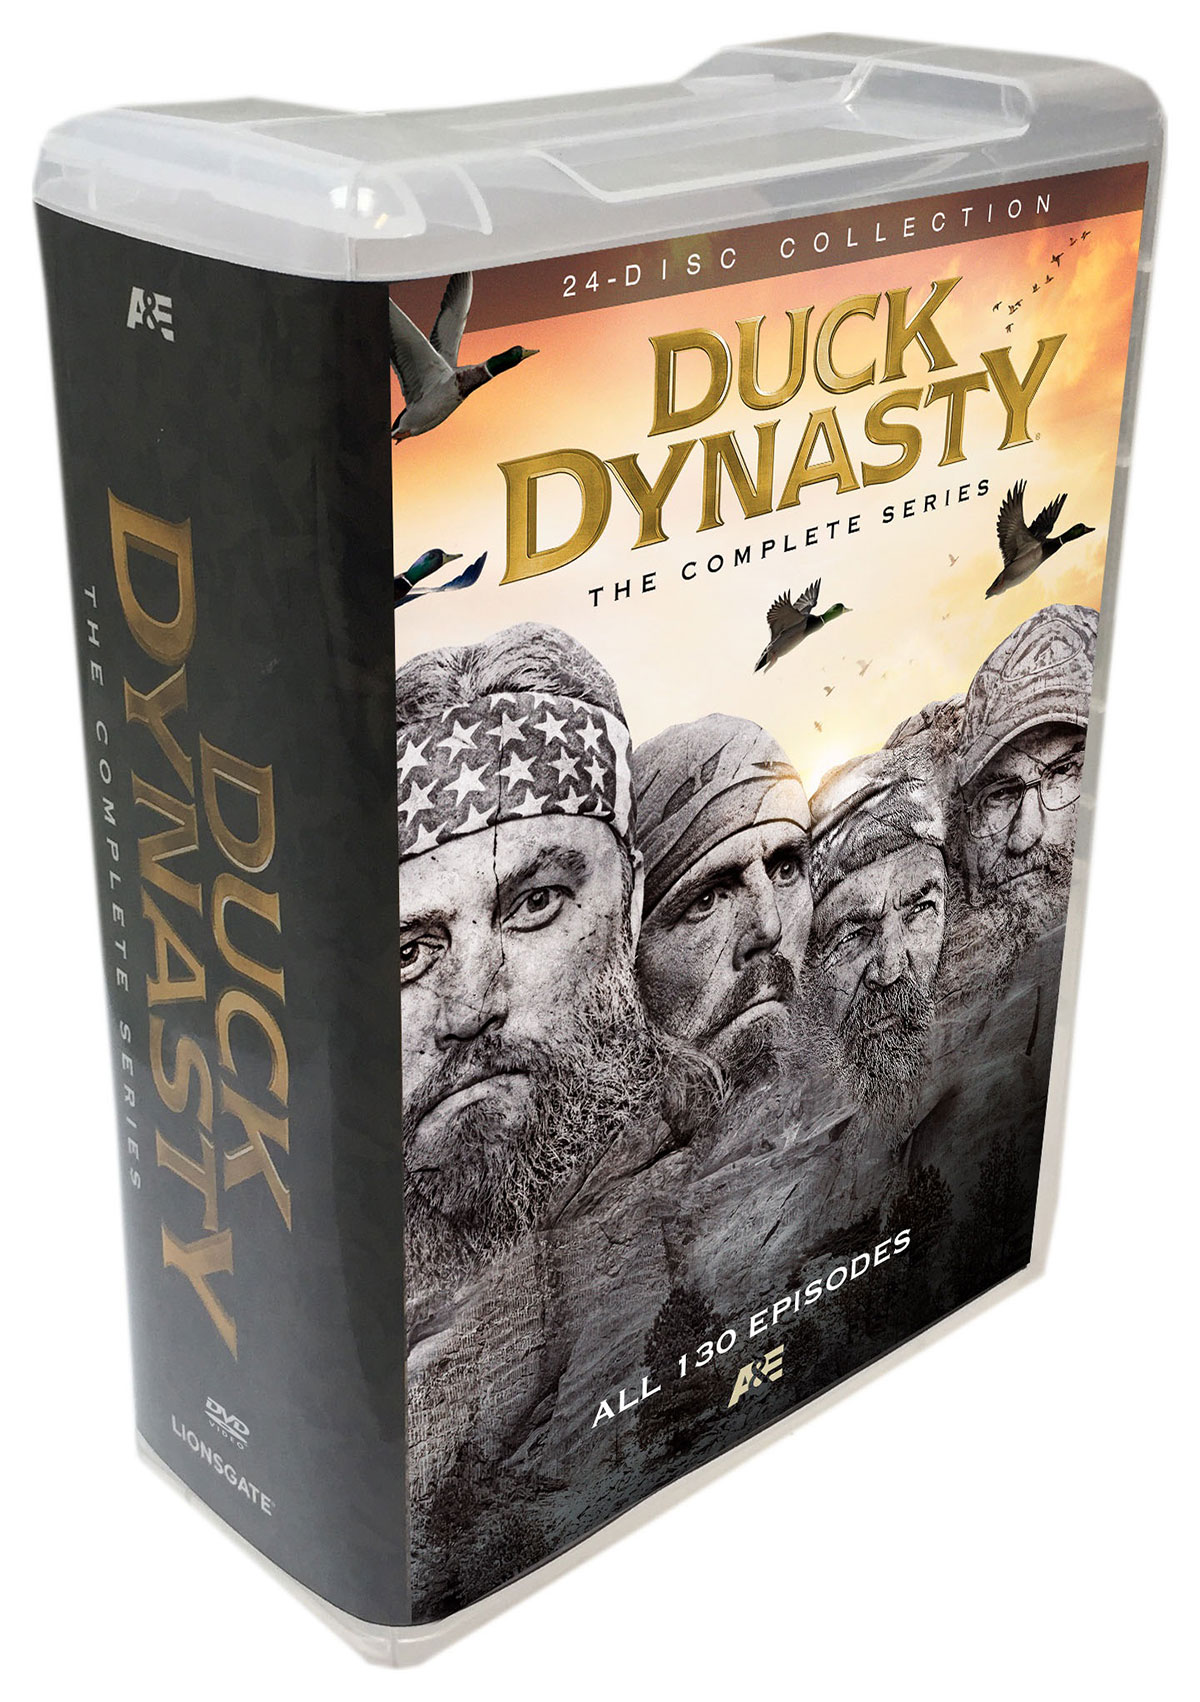 Duck Dynasty: The Complete Series (Box Set) - DVD [ 2017 ]  - Reality Show Television On DVD - TV Shows On GRUV